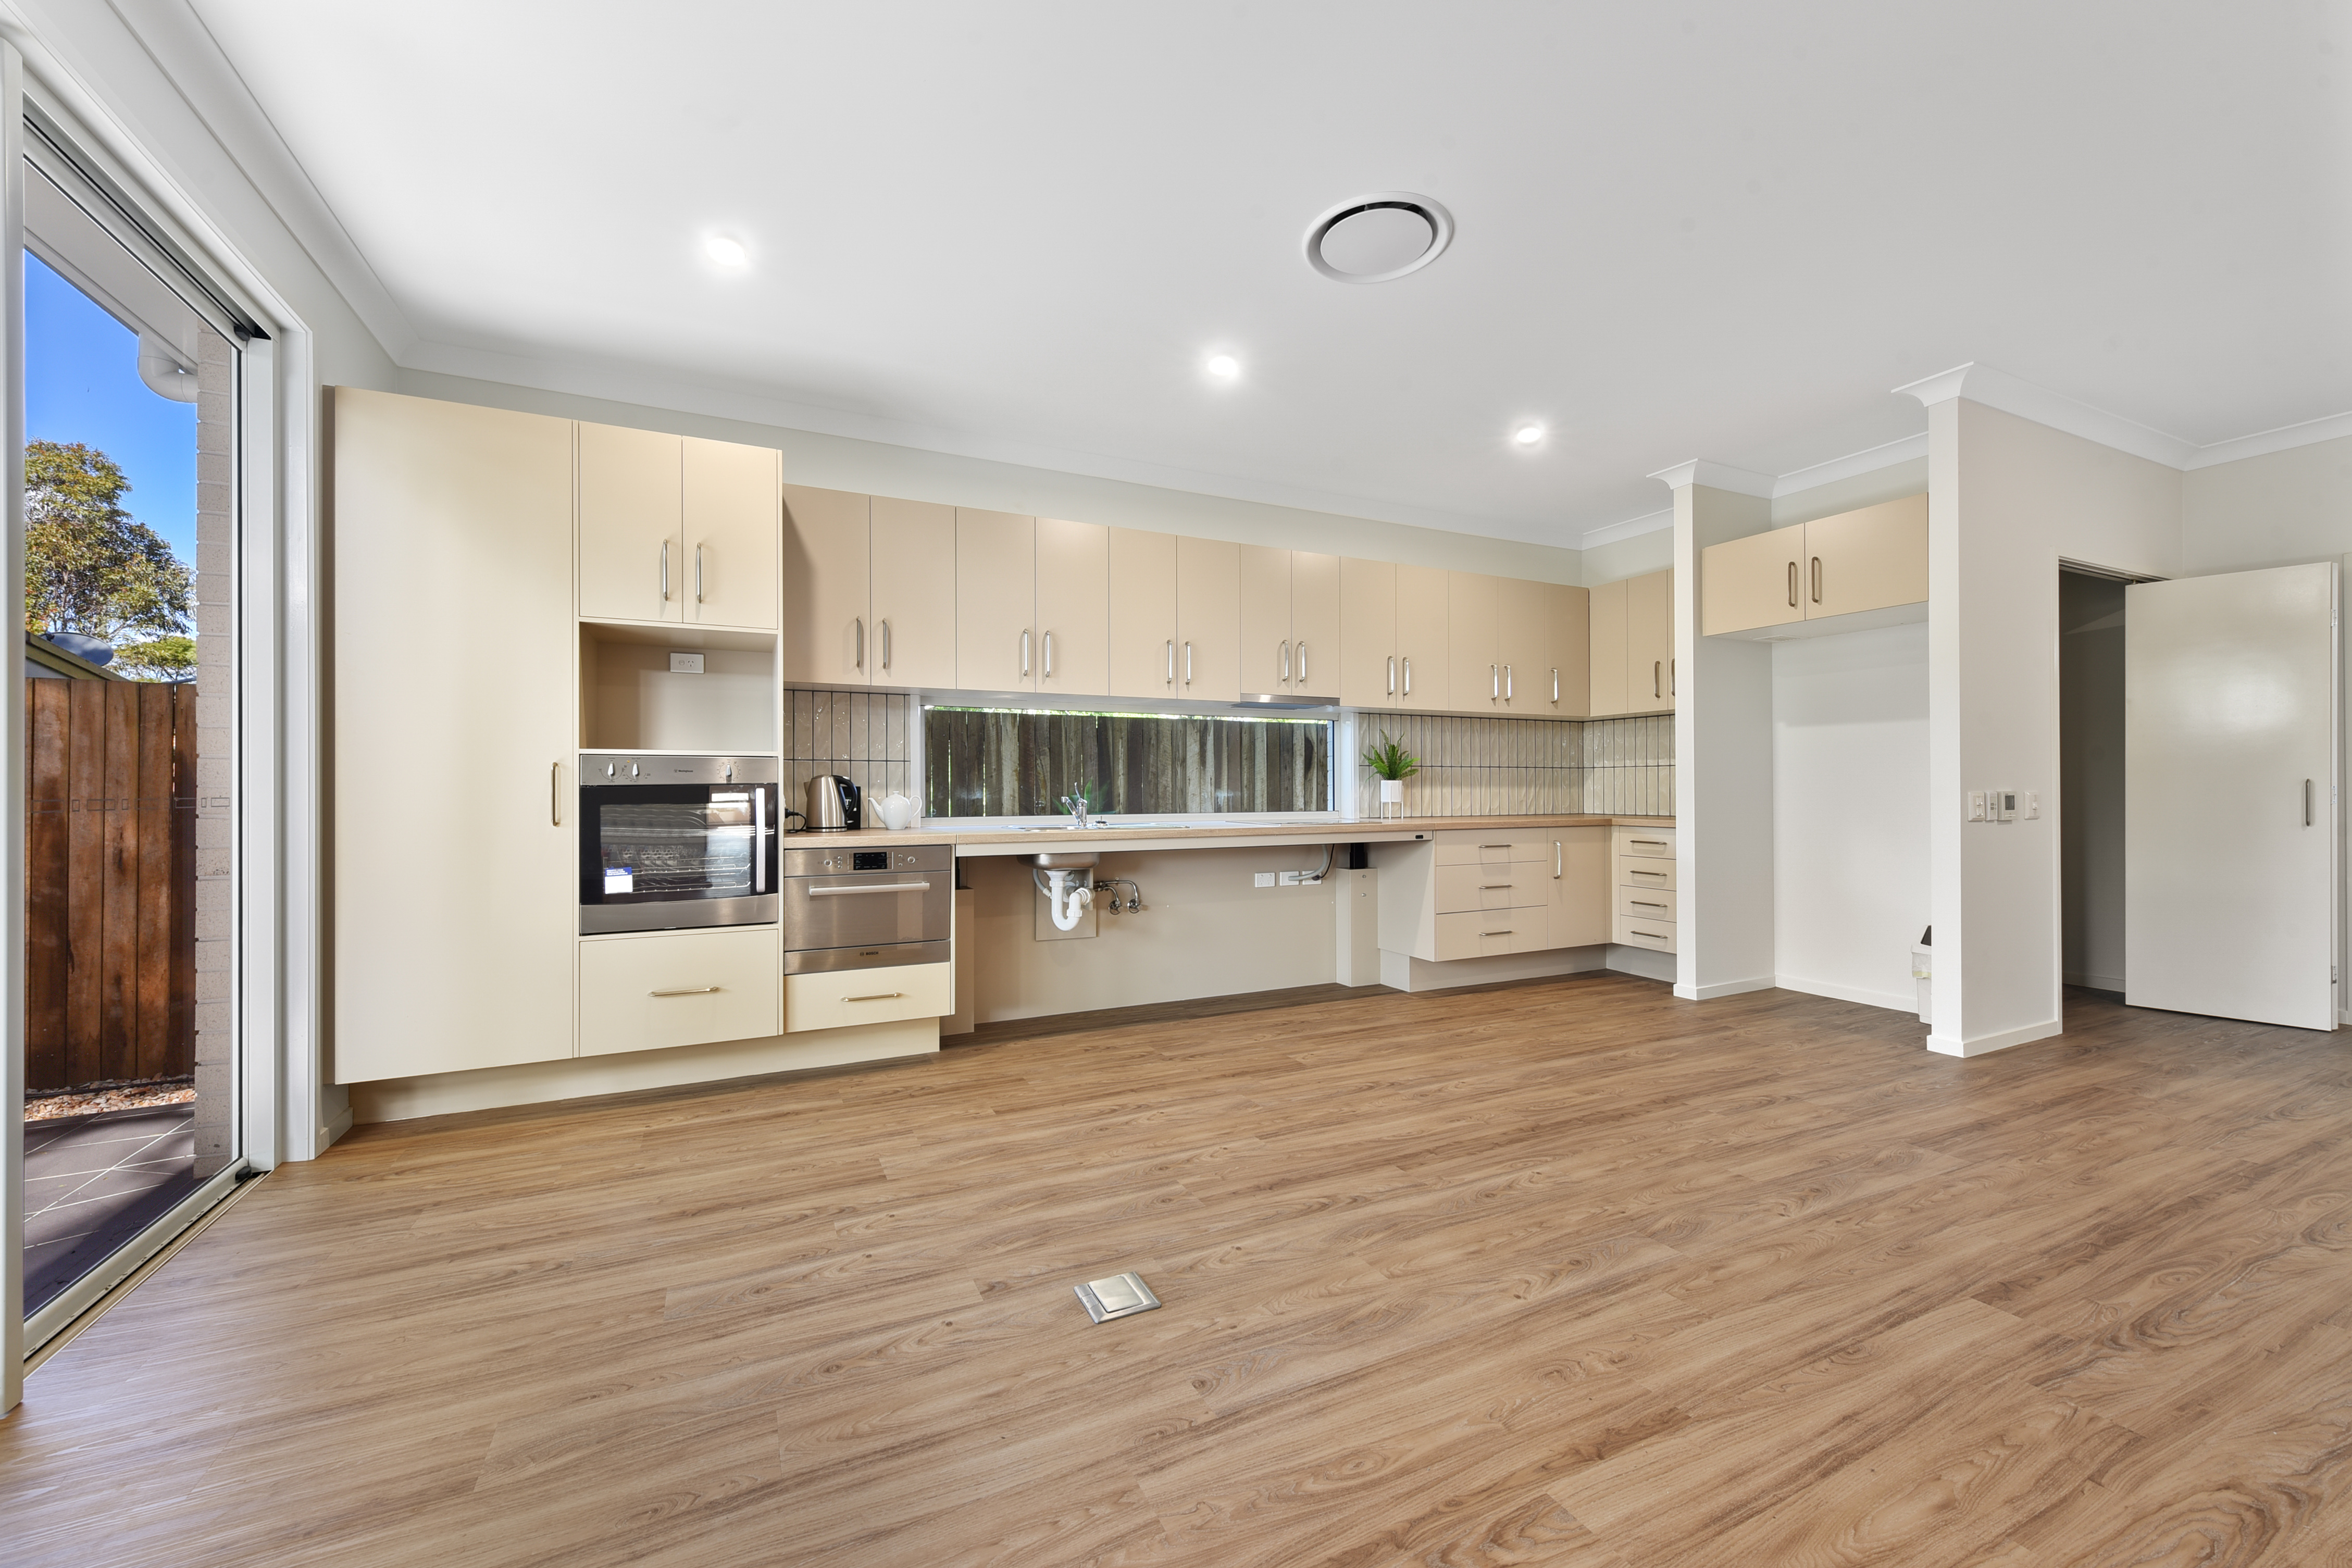 Unfurnished Kitchen and Dining area with wooden floorboards and large opening doors